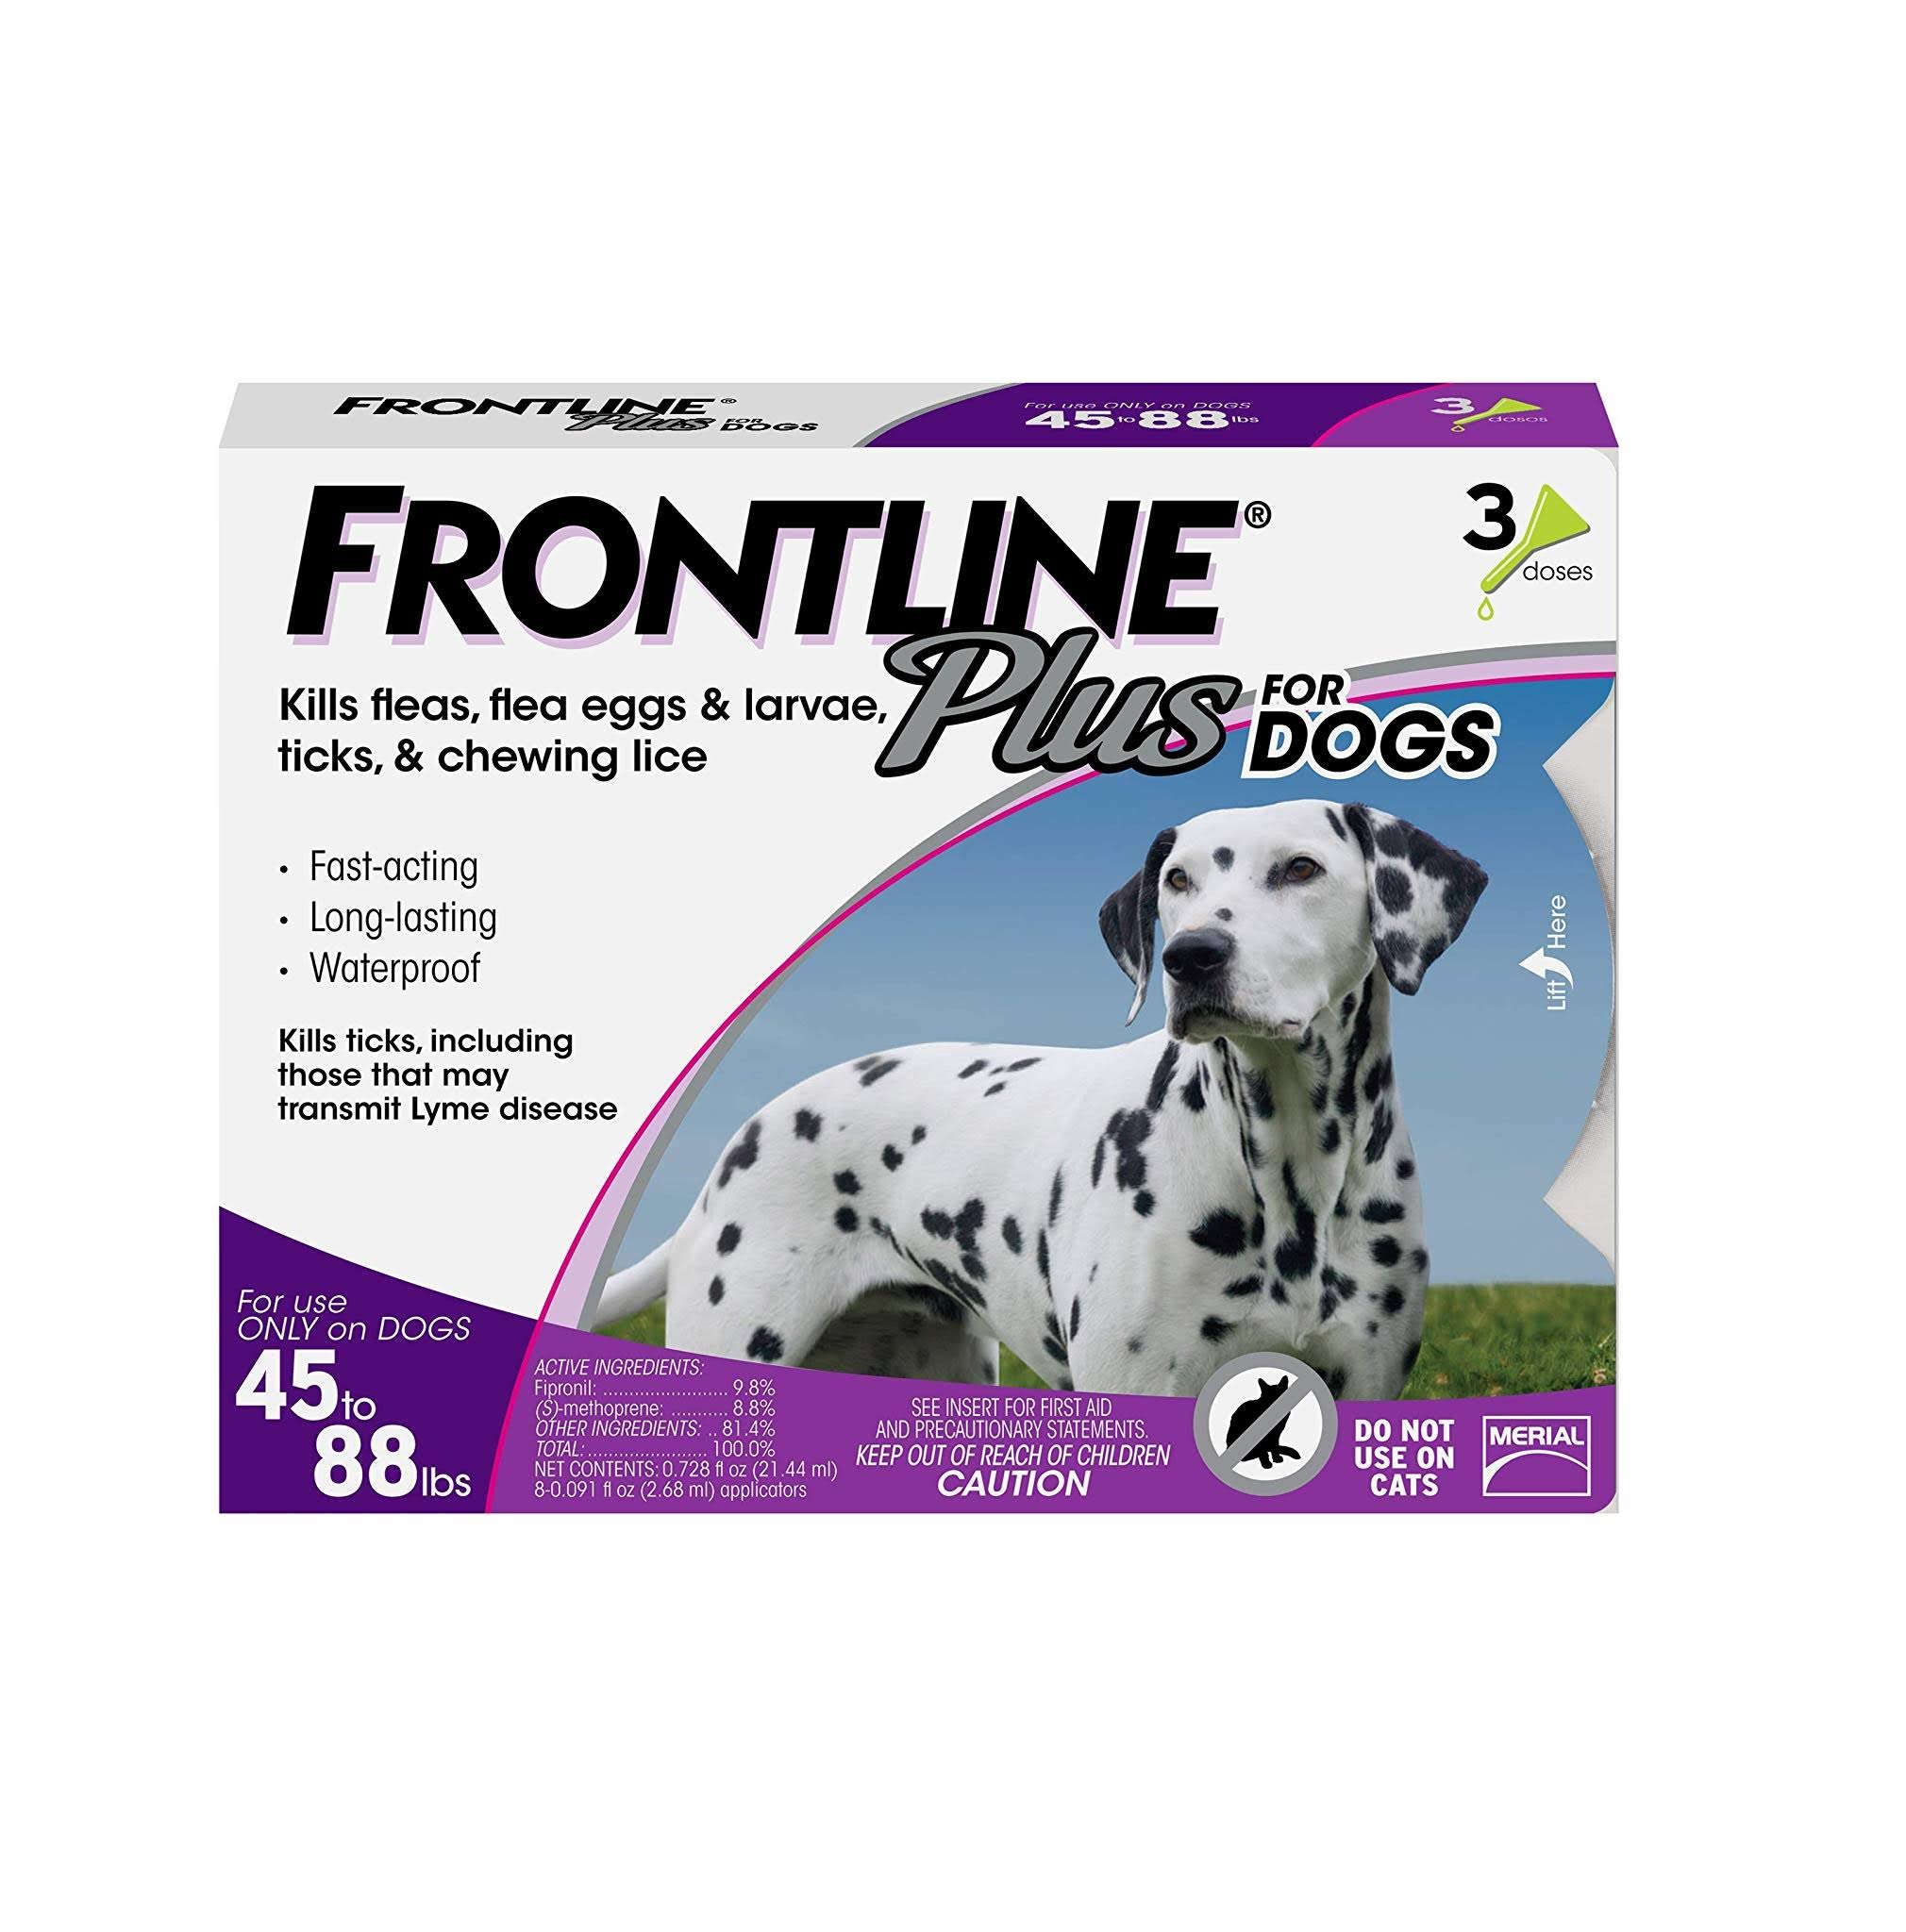 Frontline Plus For Dogs - 3 Doses